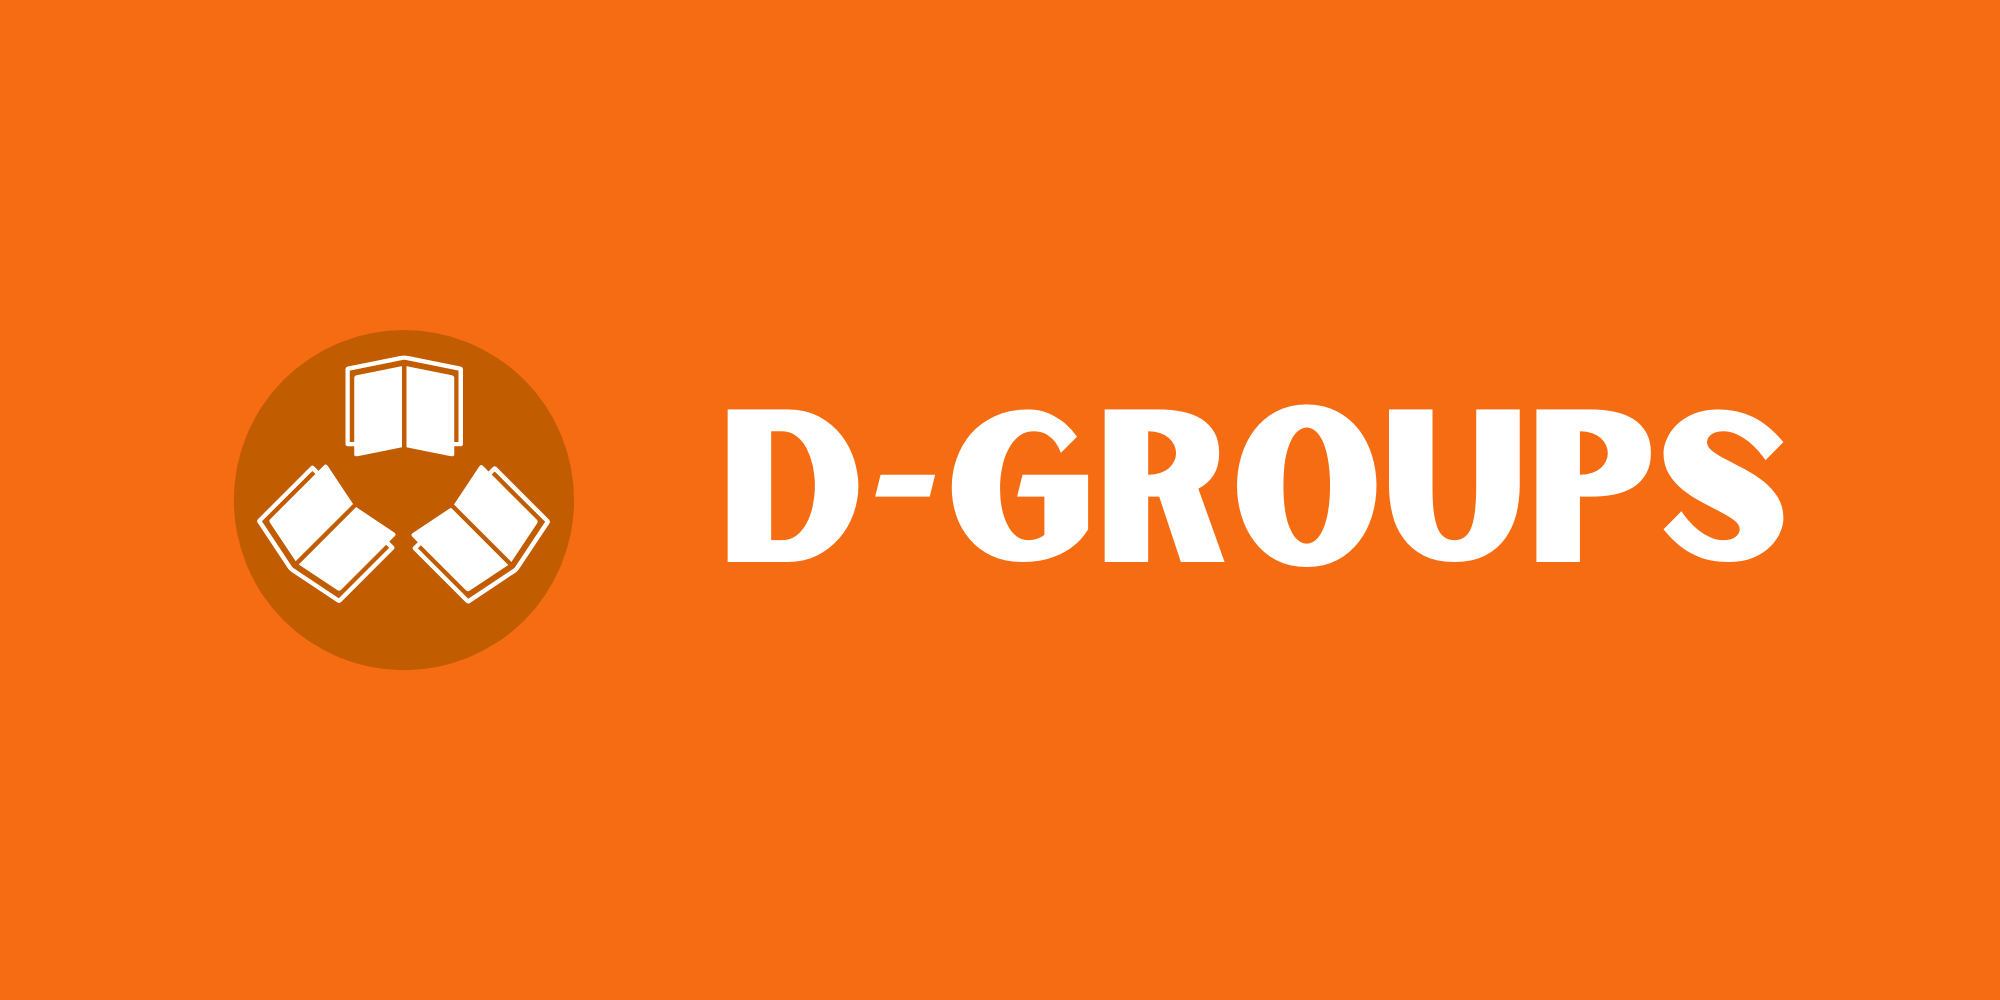 D-Groups